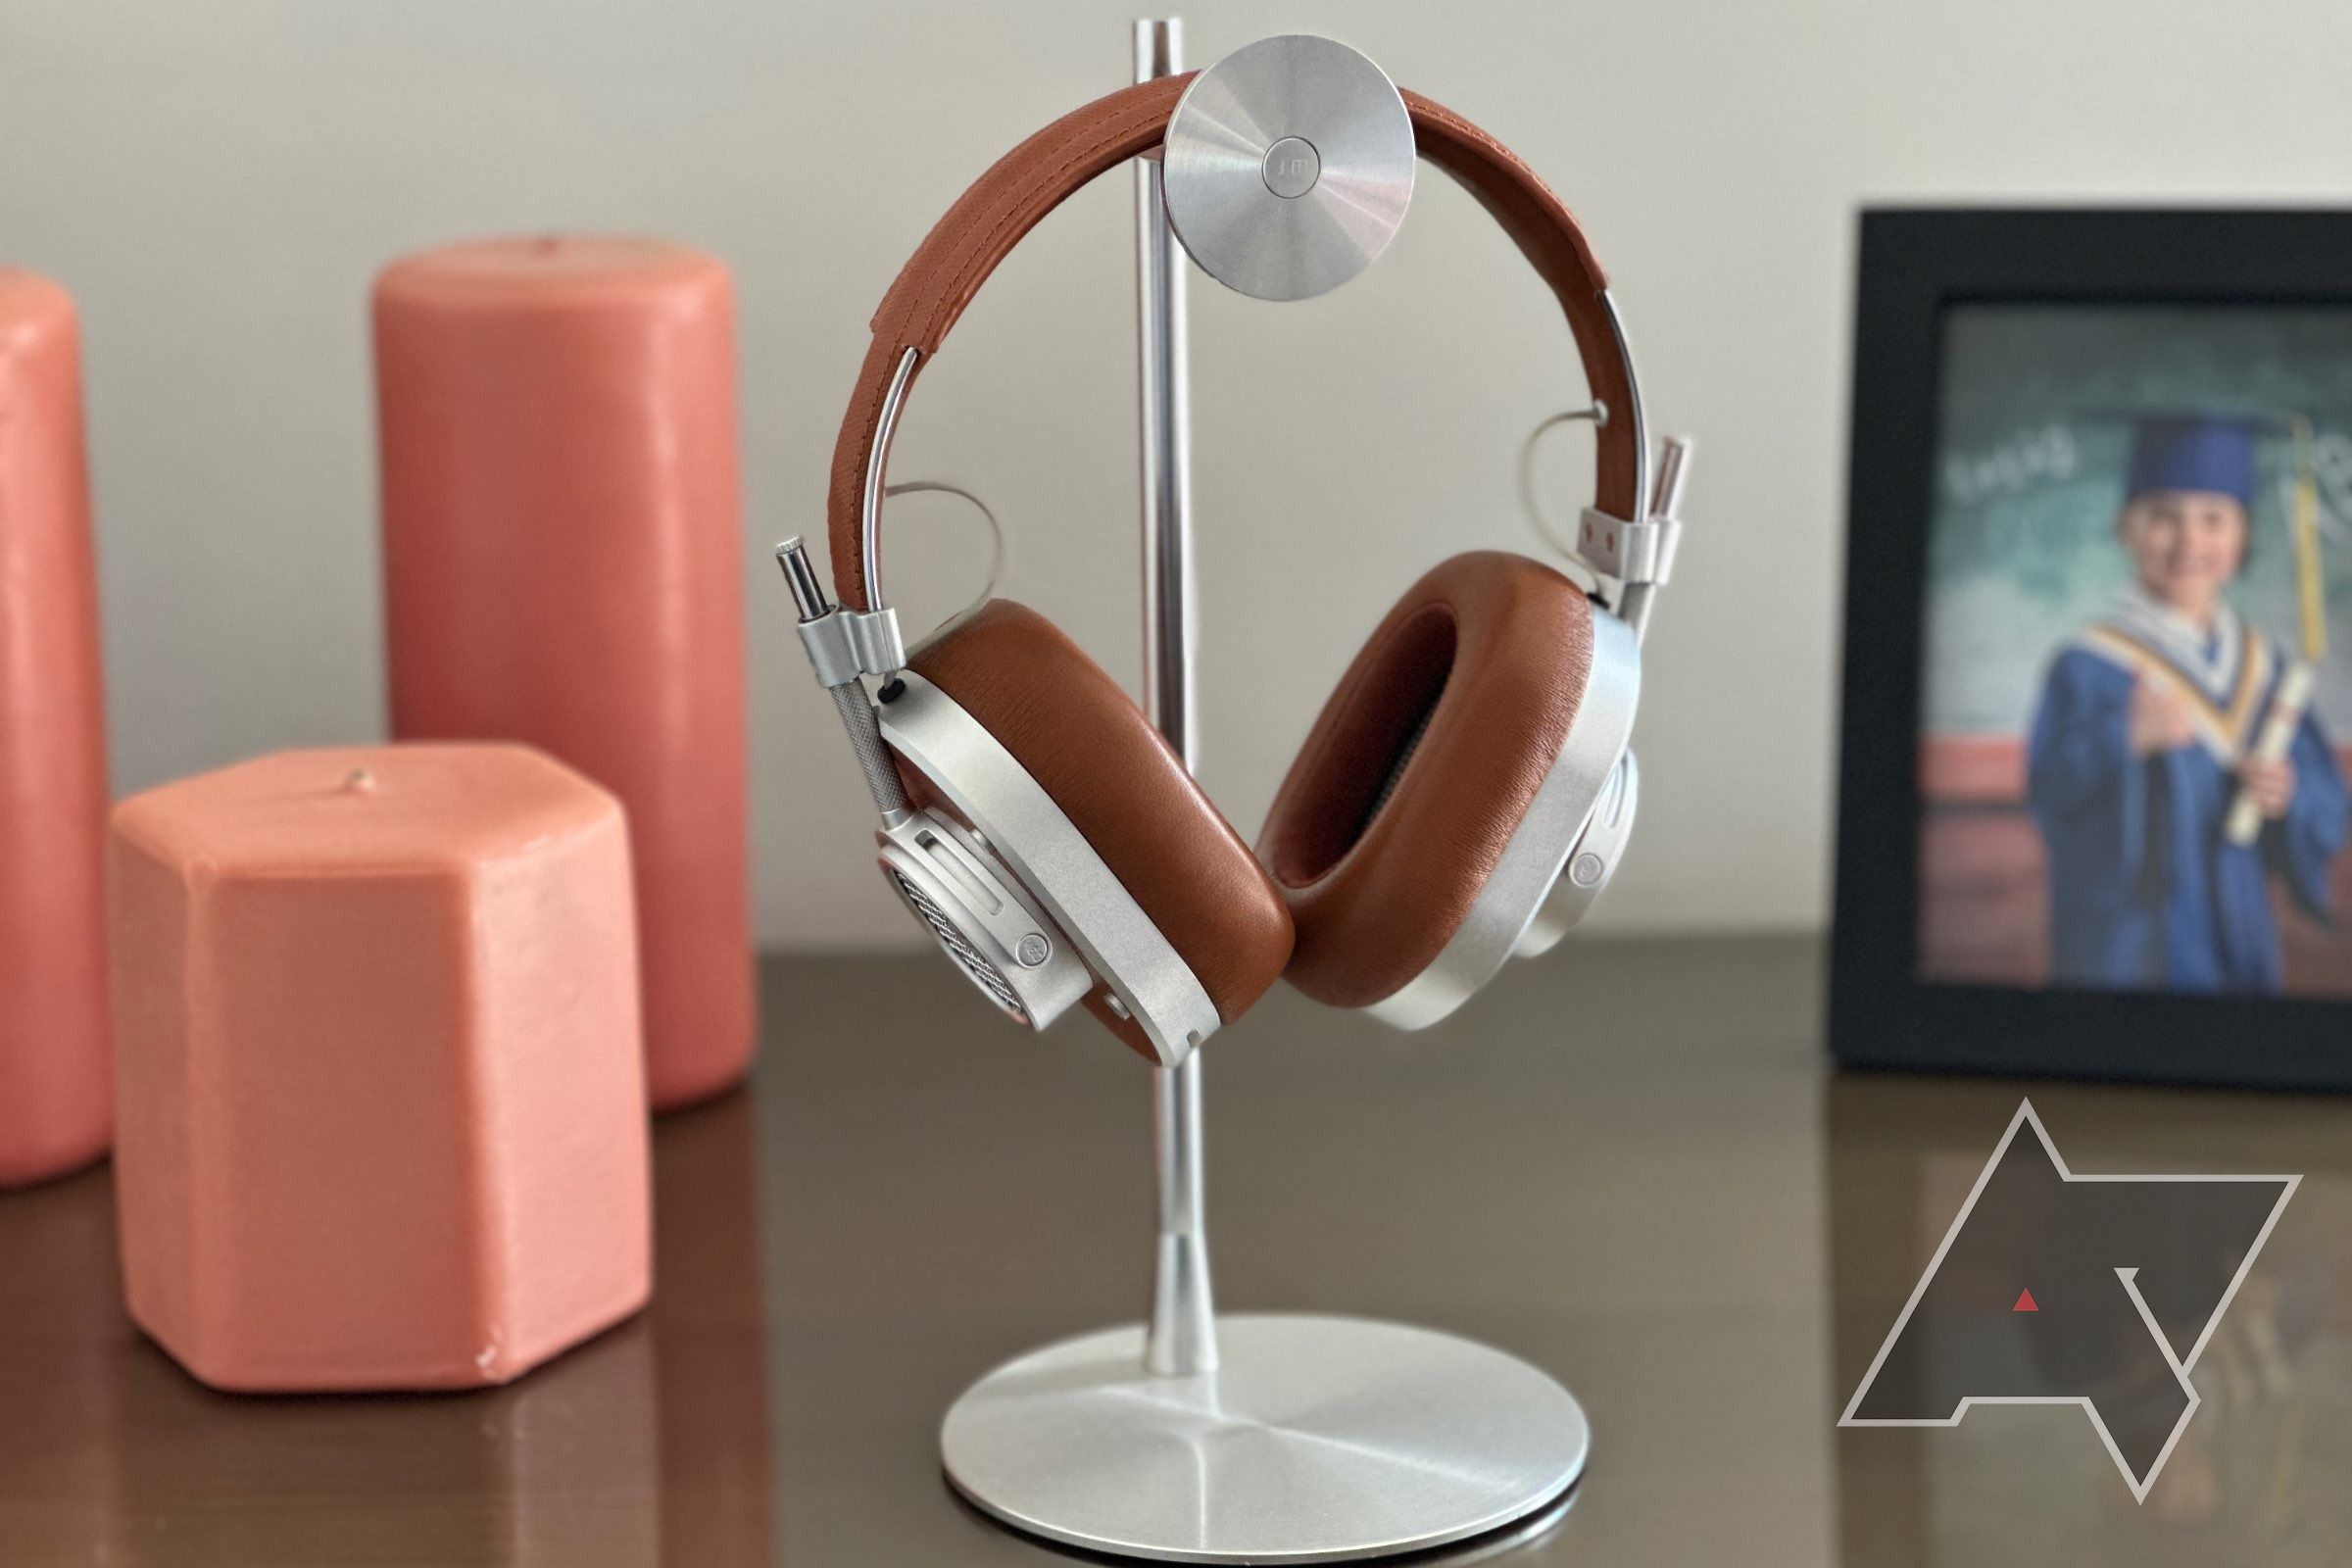 Louis Vuitton Slaps Own Branding on Master & Dynamic MW07 Wireless Earbuds  (Updated)